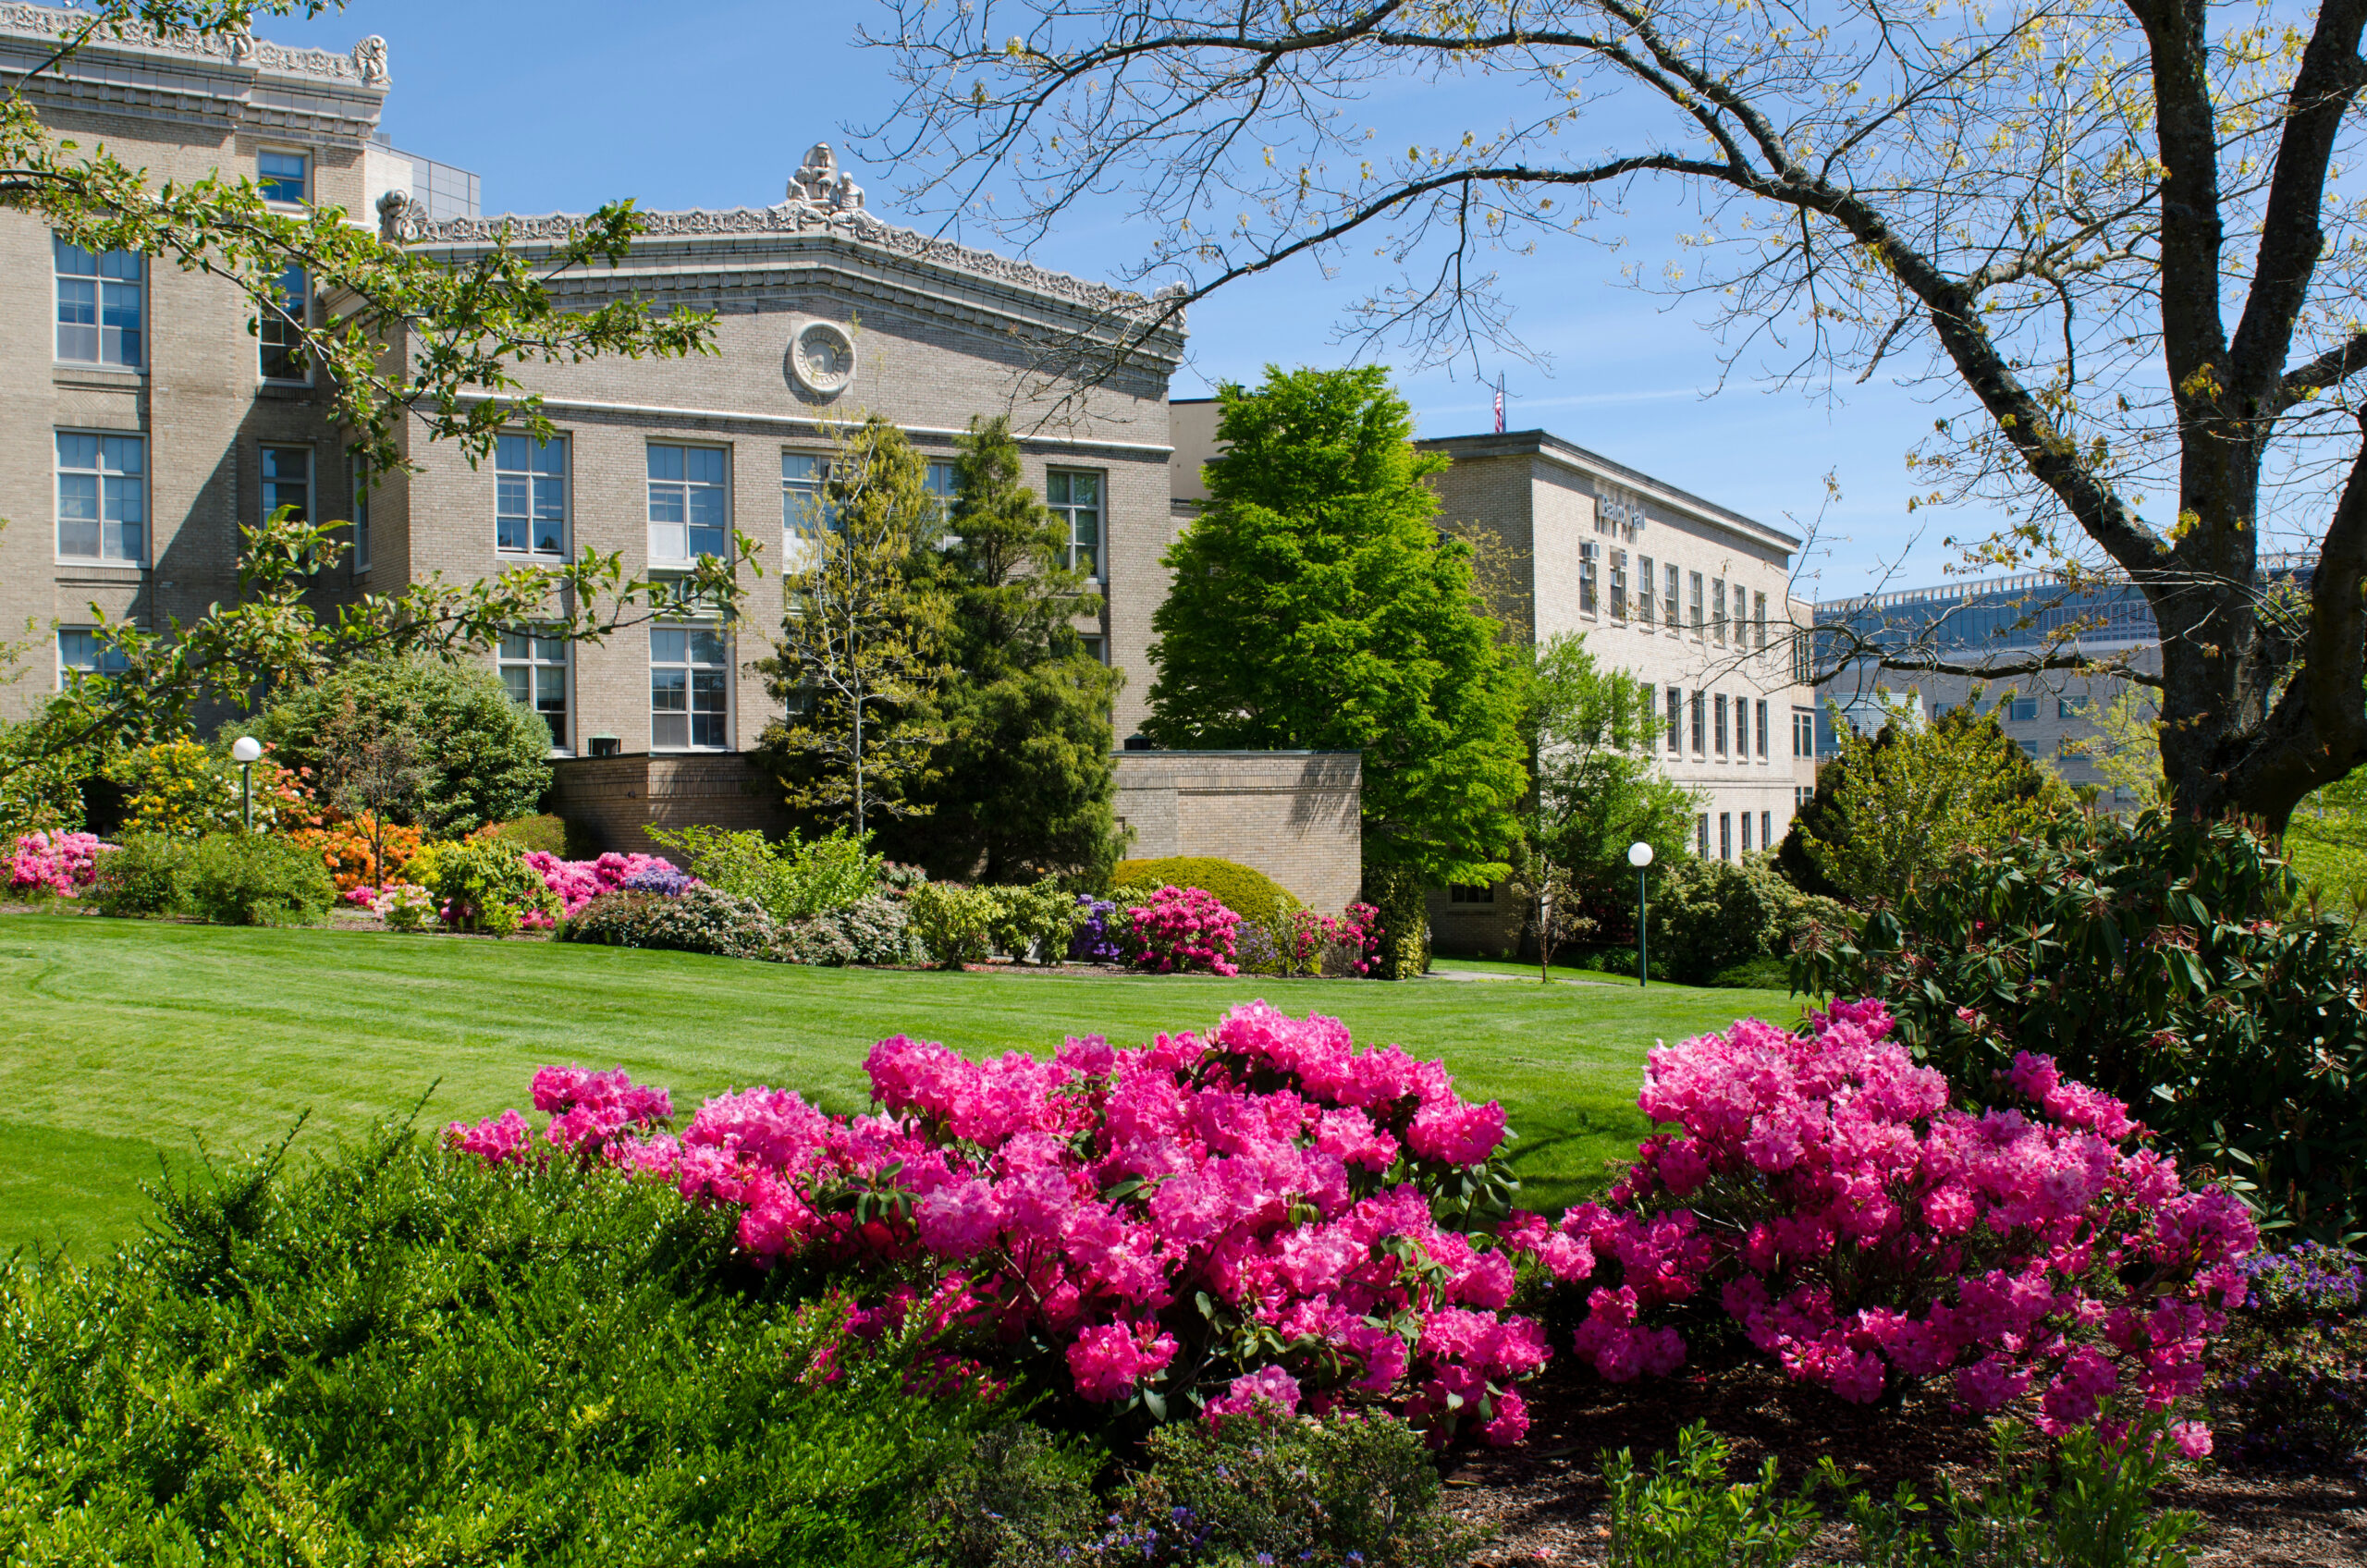 Image of OHSU medical building in the springtime with pink flowers blooming in the front lawn.